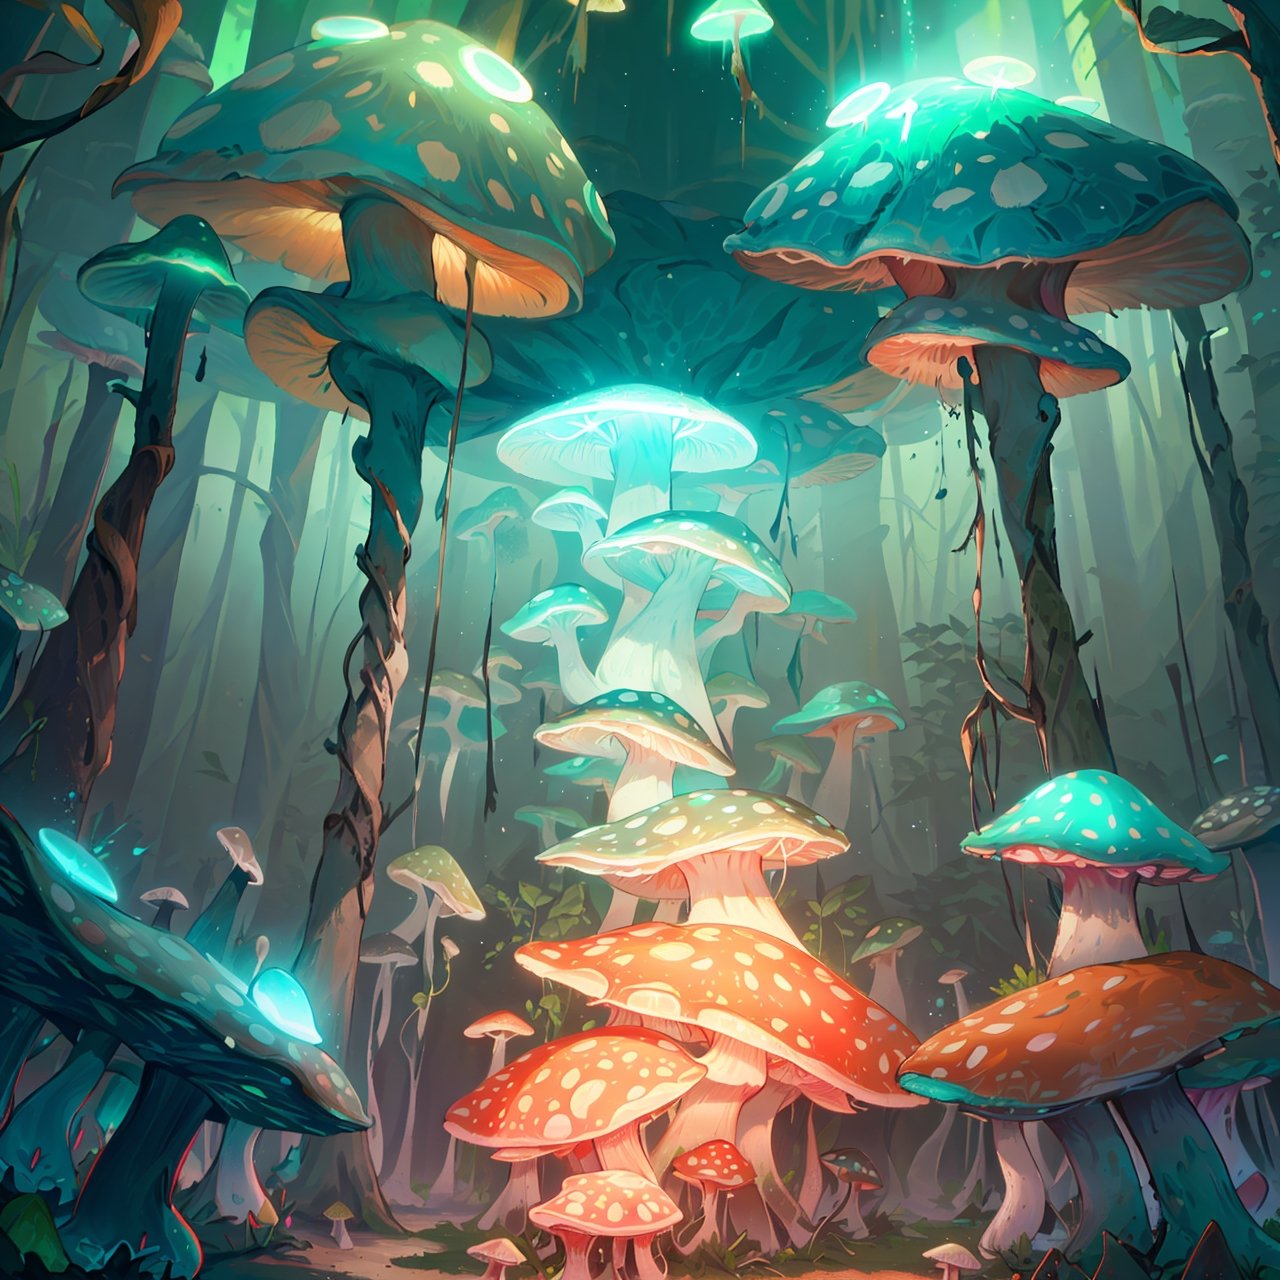 Frontal side, finely detail, Depth of field, (((masterpiece))), ((extremely detailed CG unity 8k wallpaper)), intricate detail, (best illumination, best shadow), (((contamination))), (((fungi forest))), (((giant fungi, such as sporangia, conidiophores and films, reach enormous dimensions. They intertwine in a canopy that releases spores and emits faint bioluminescence at night, providing a surreal appearance. These fungal life forms have complex symbiotic interactions and, although visually impressive, are also dangerous, releasing toxic spores and contributing to the overall toxicity of the region.))
